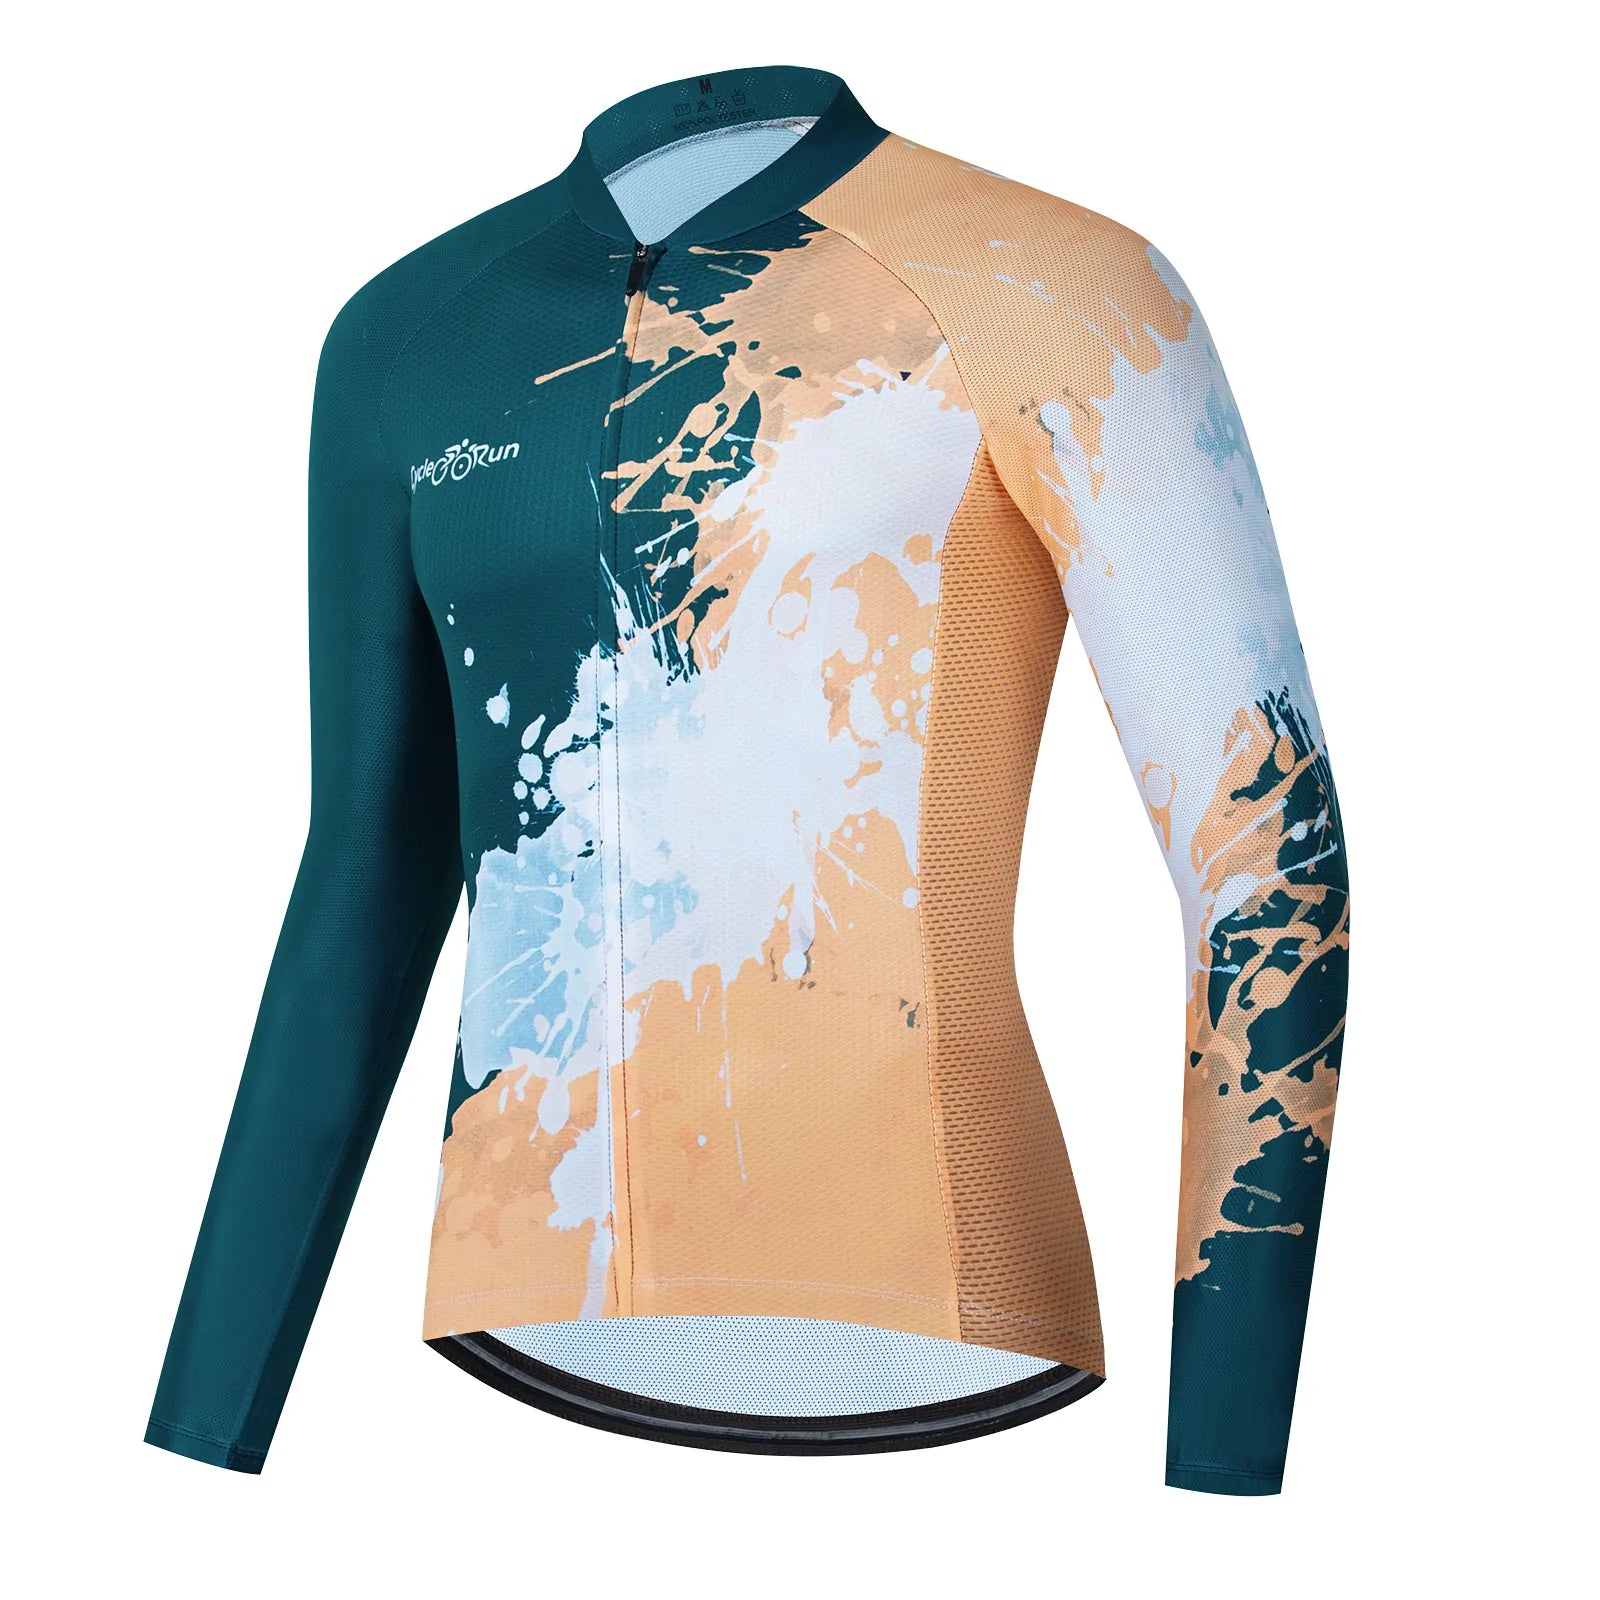 Body color paint splash Long Sleeve cycling jersey for women